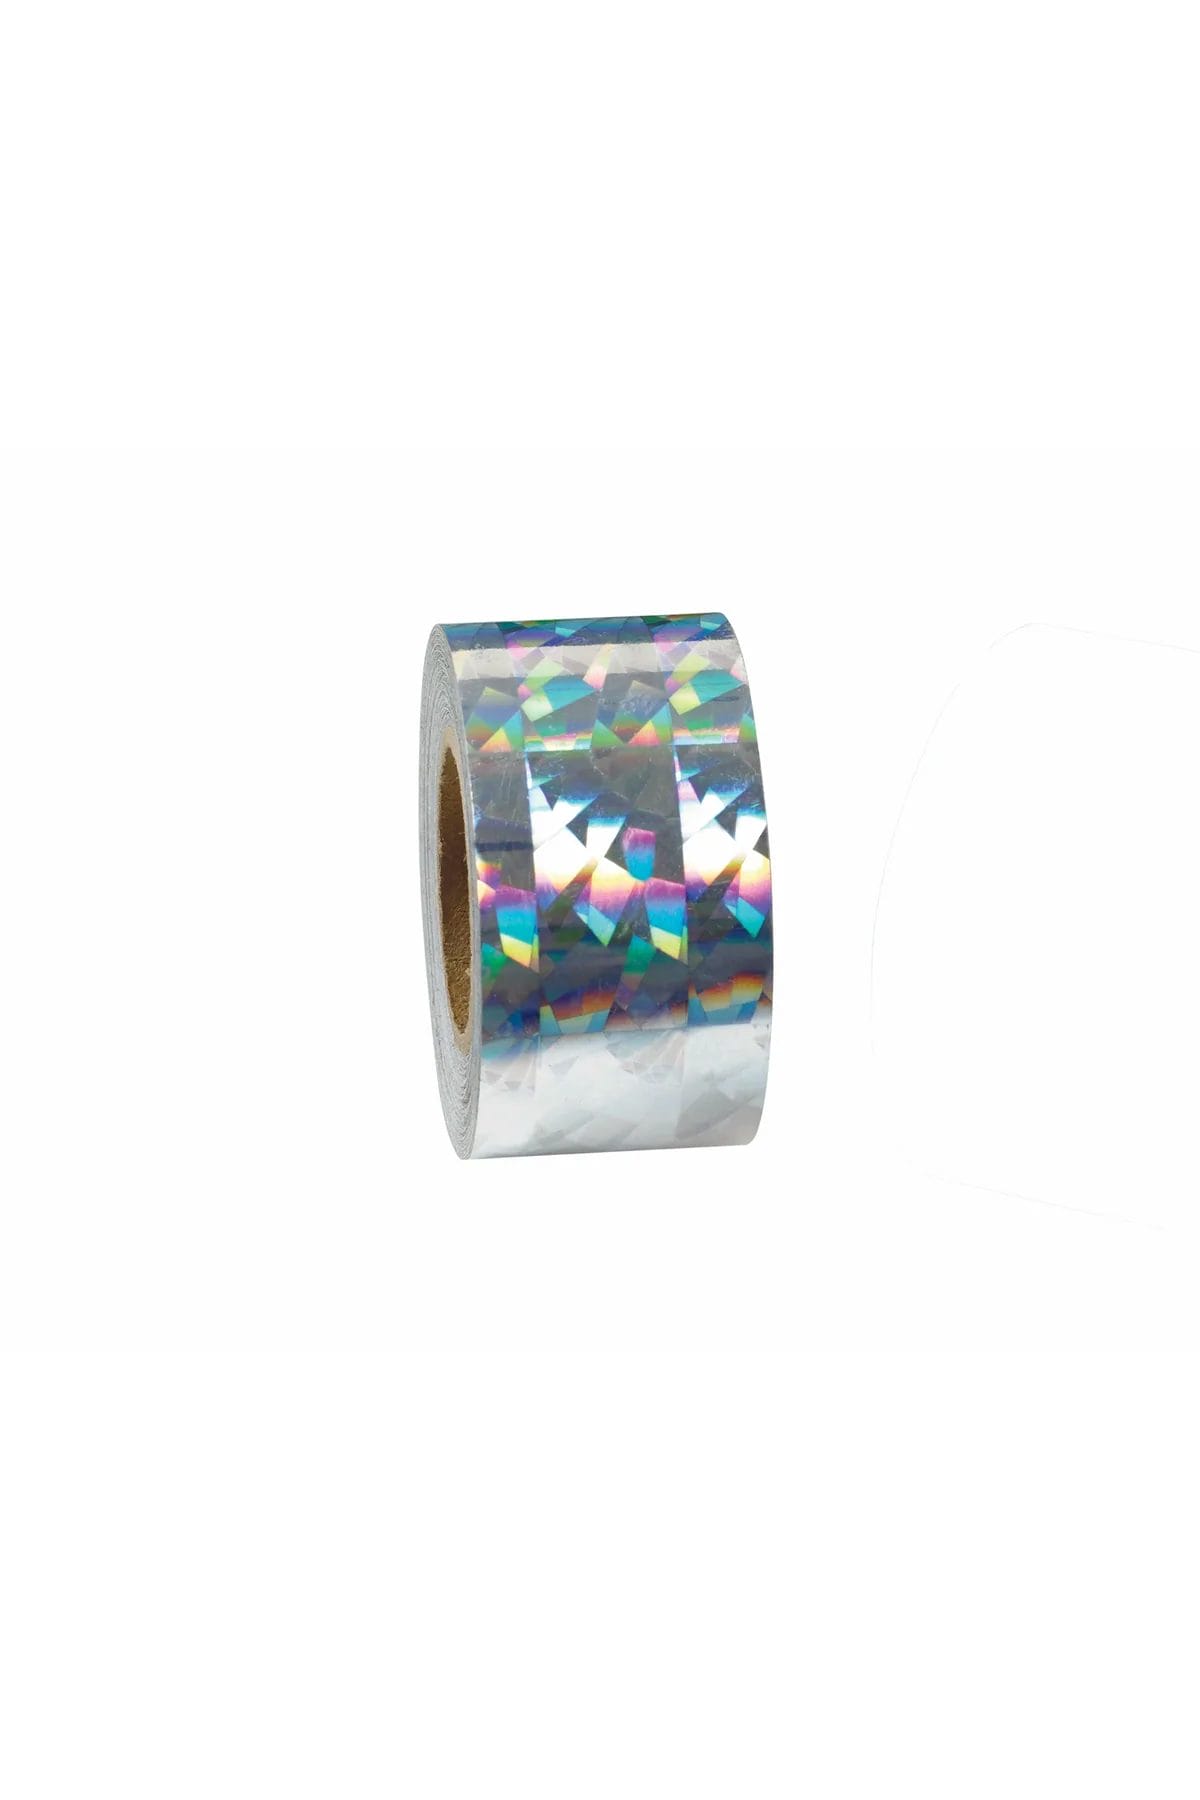 Styleplus Holographic Tape 1 inch (Cracked Ice & Sequin Pattern